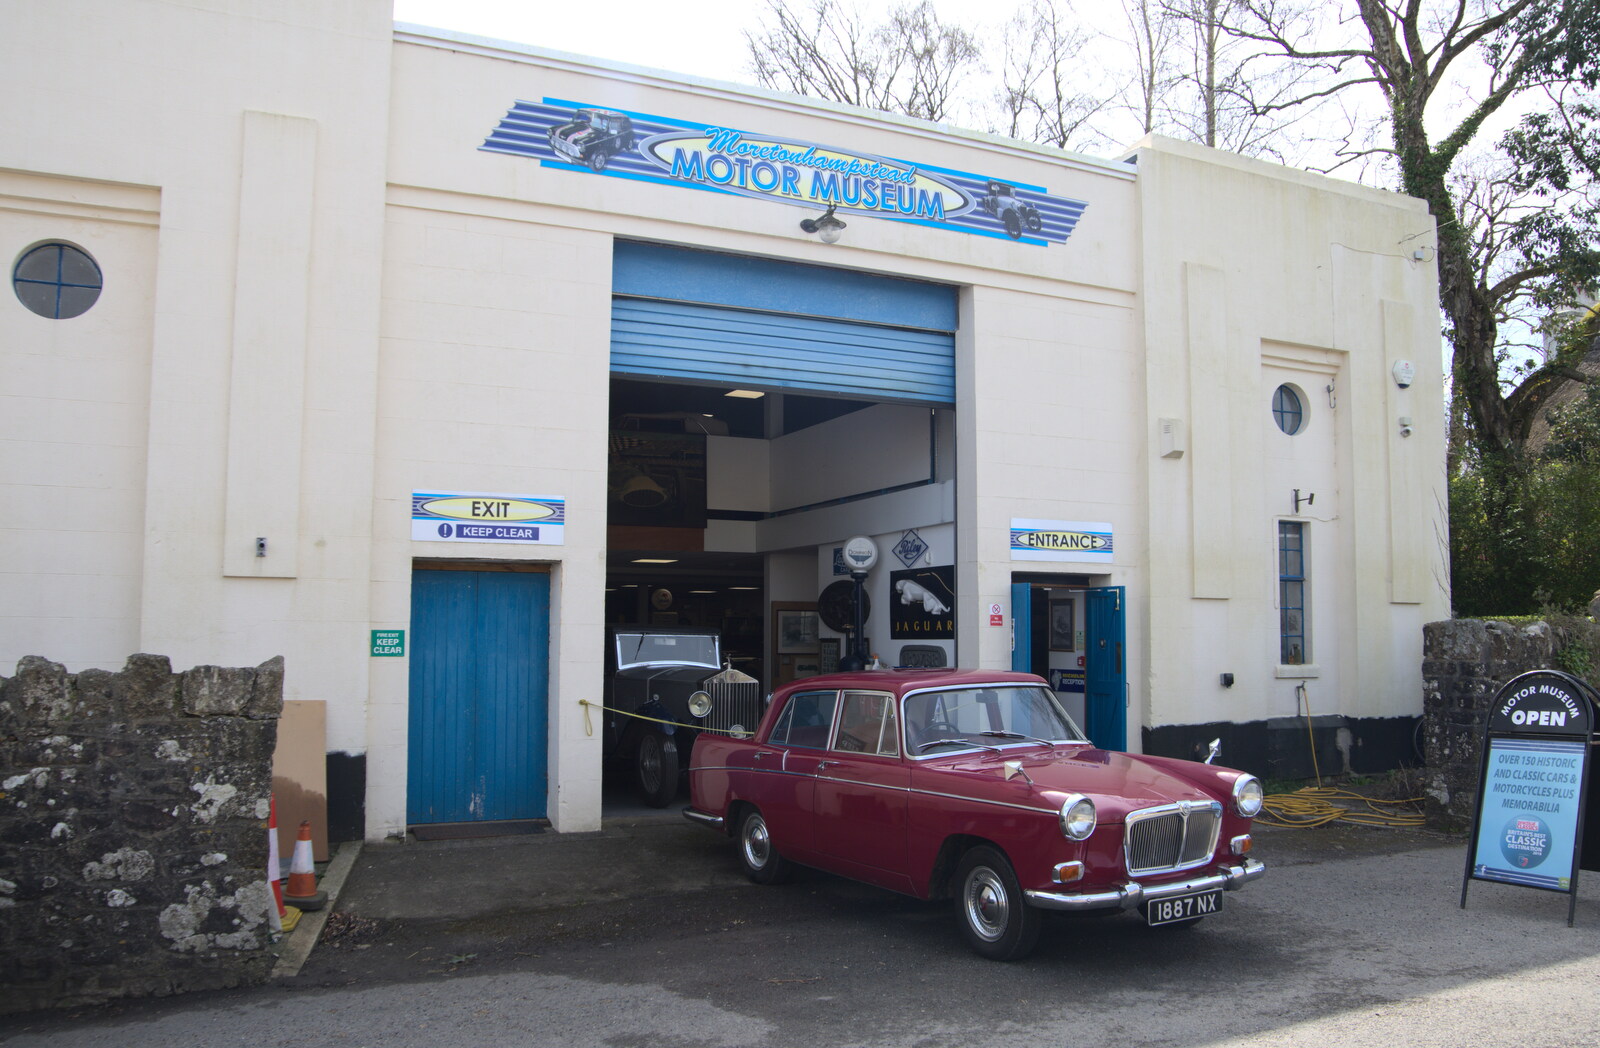 The Moretonhampstead Motor Museum from Easter in South Zeal and Moretonhampstead, Devon - 9th April